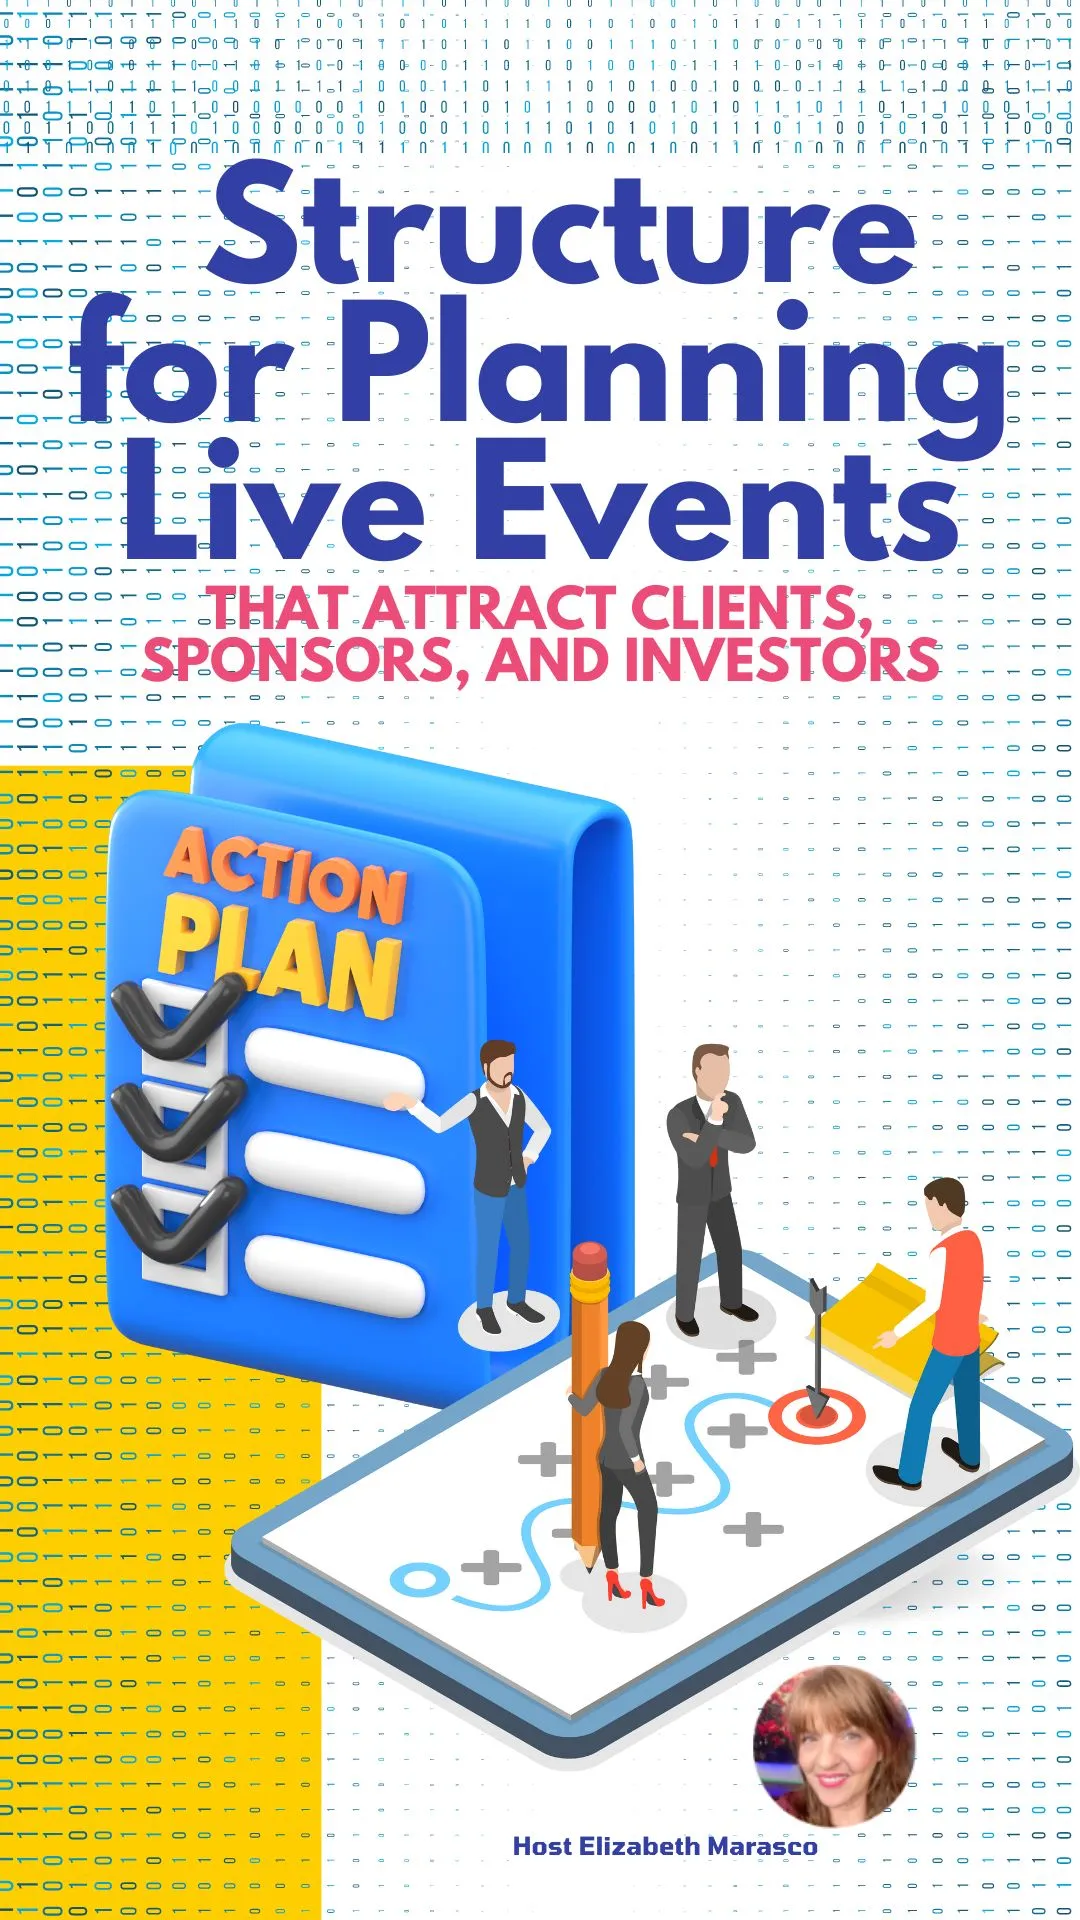 event planning structure